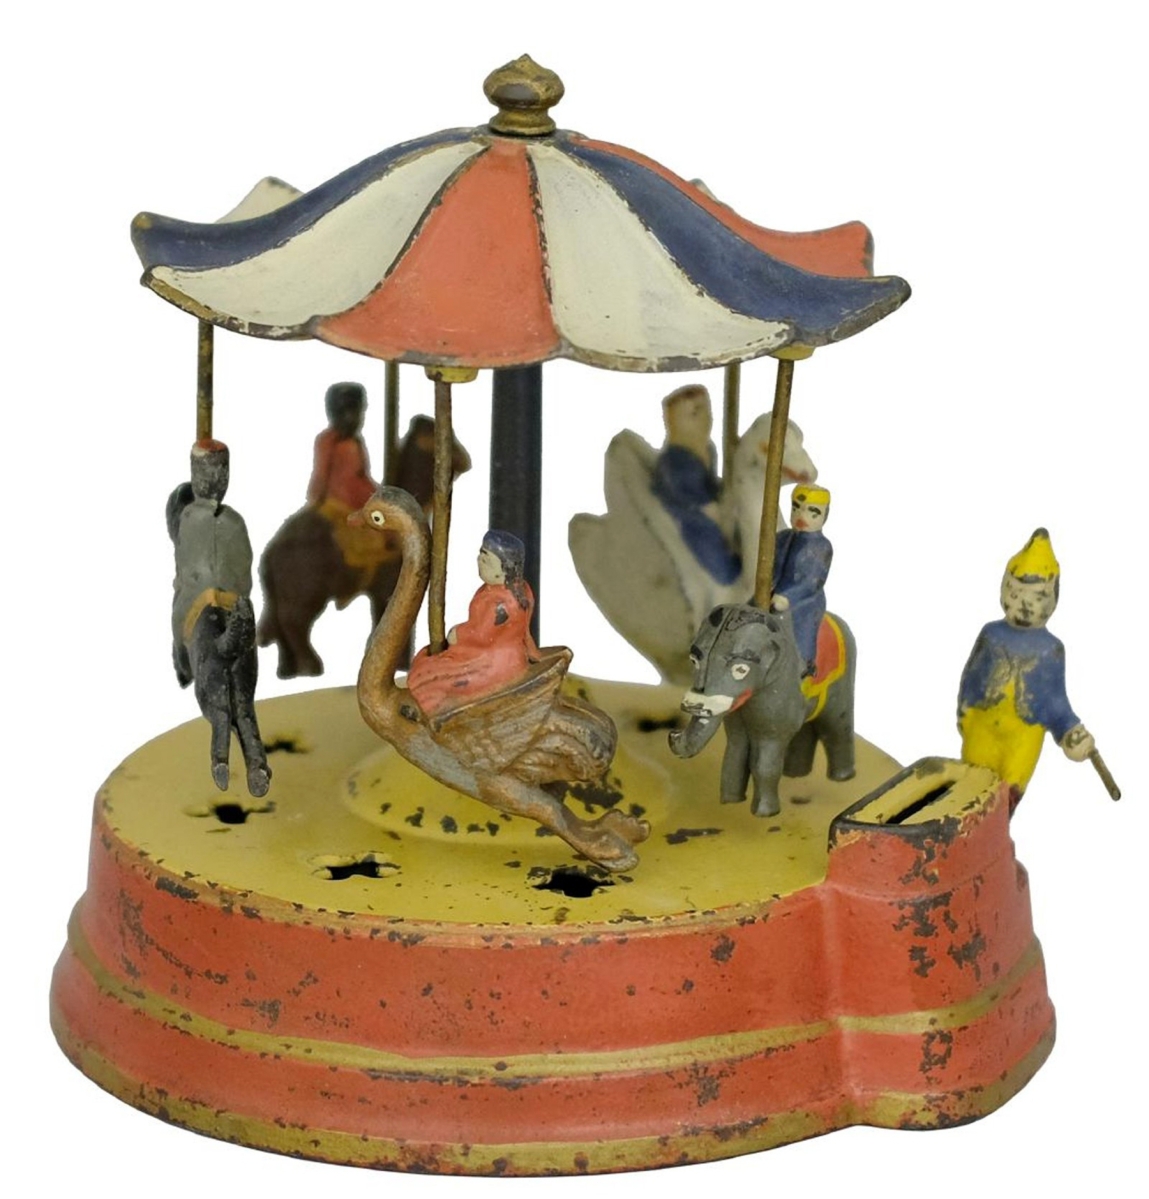 Manufactured by Kyser & Rex Company of Philadelphia was the Merry-Go-Round bank circa 1888, pristine and bright, that sold for $84,000, just under the high estimate. The catalog notes that “It has absolutely everything going for it, with a color palette that is varied, bright and cheerful.” Very few examples of this bank have made it into modern times unbroken, but this example is completely original.